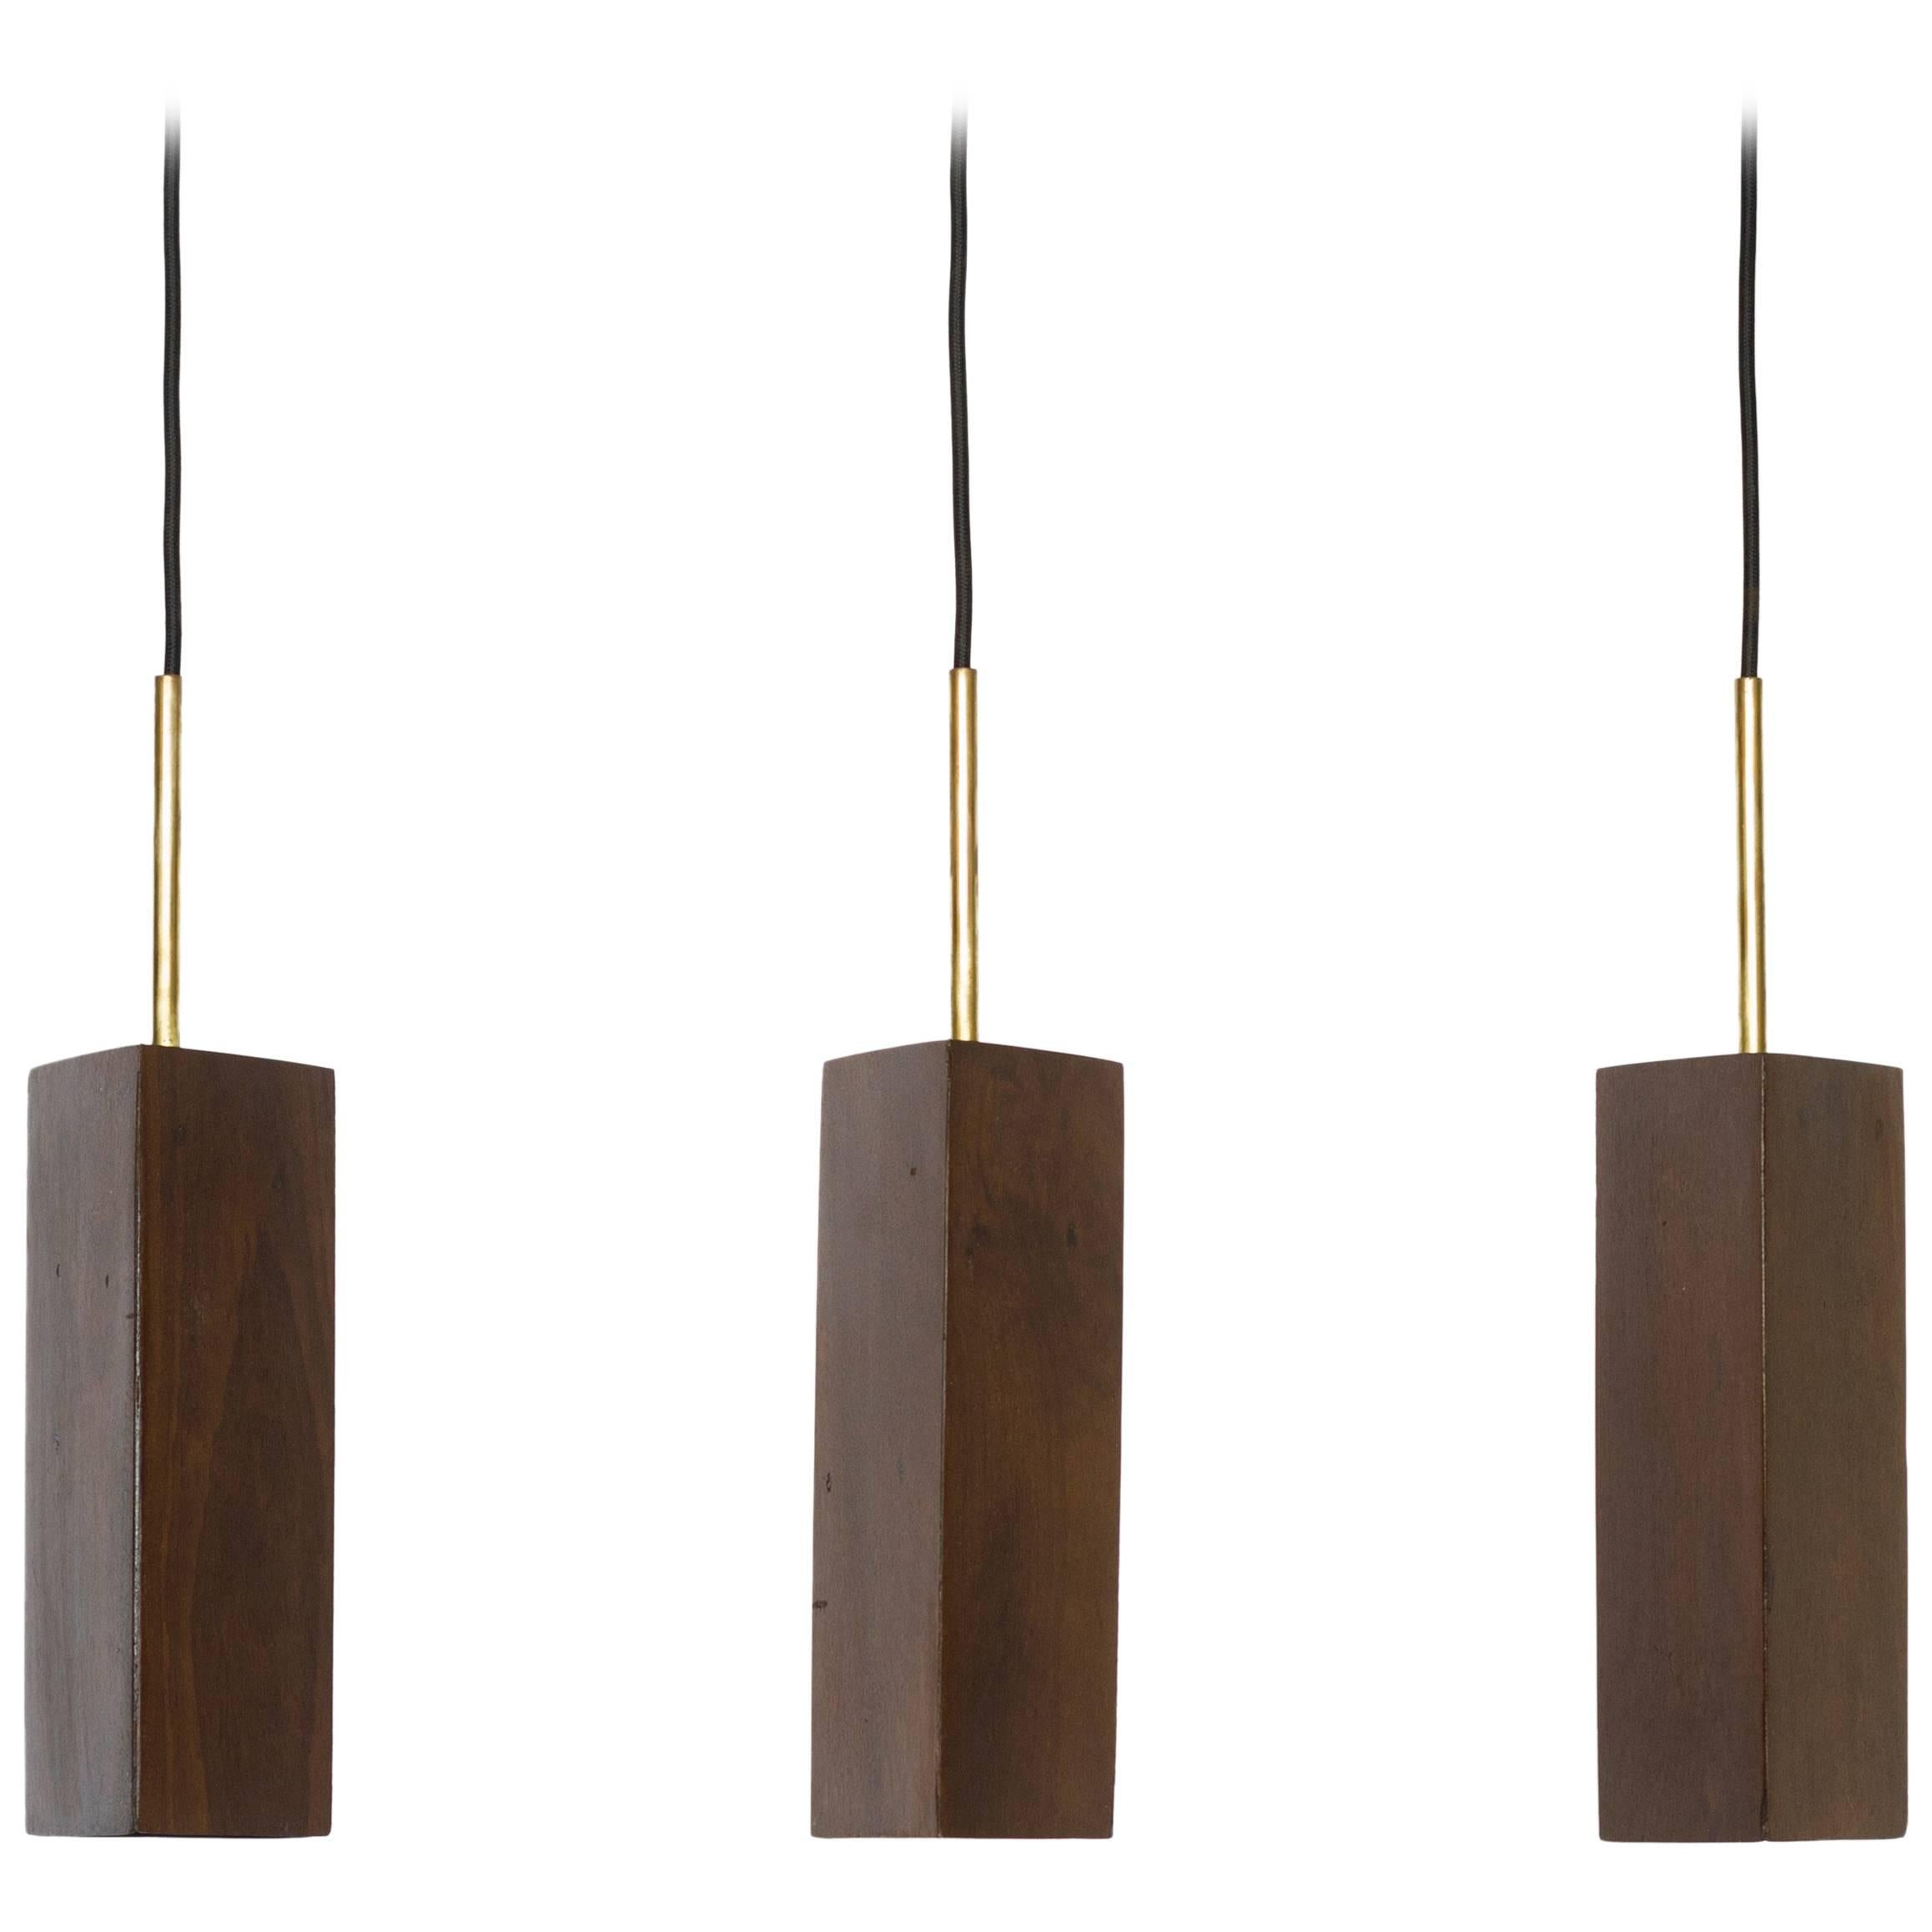 Pendant Lamp in Wood and Brass. Brazilian Contemporary Design by O Formigueiro. For Sale